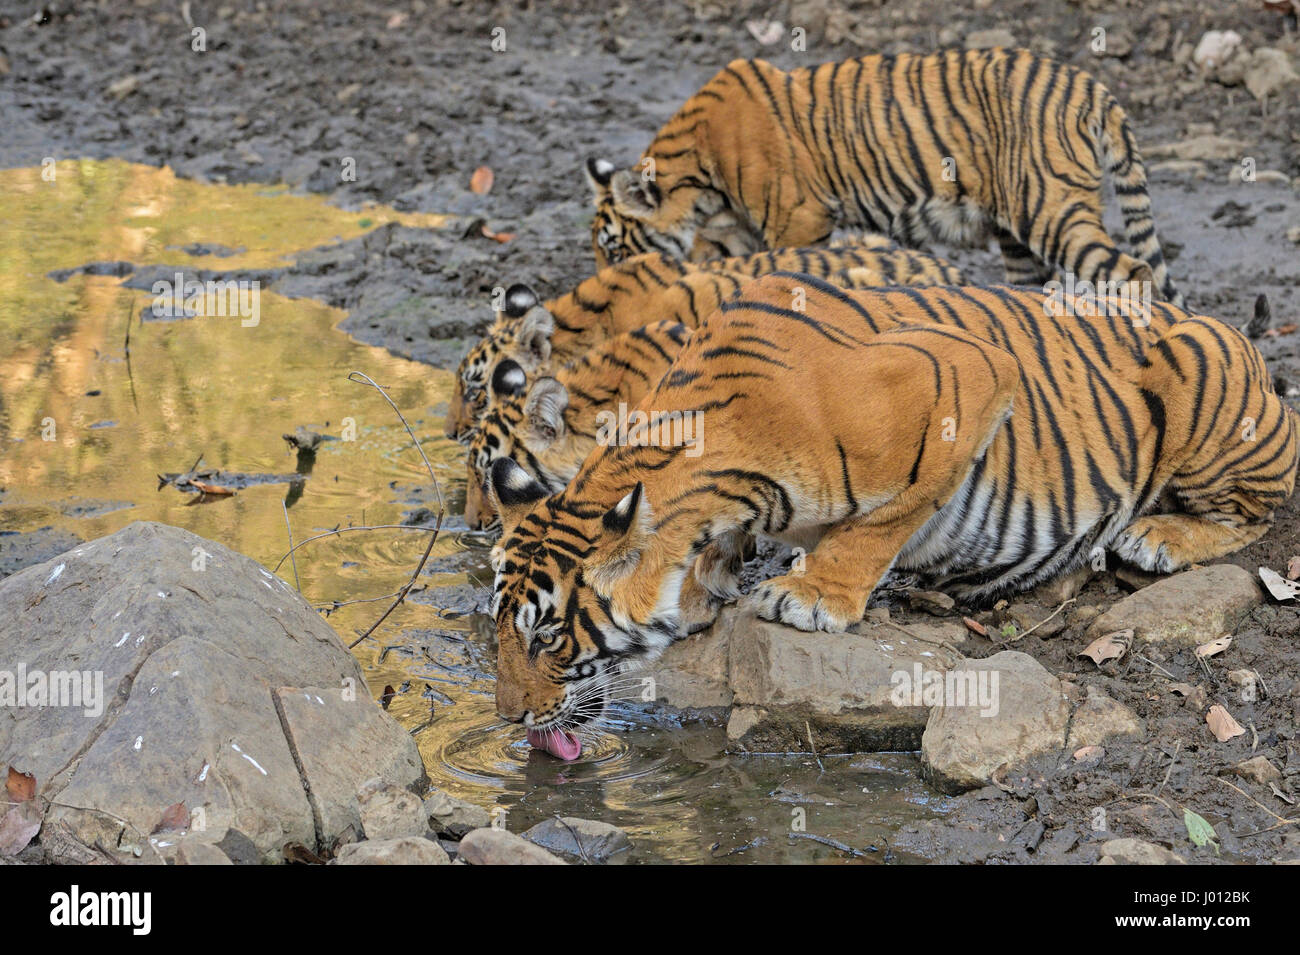 A wild tigress with her young cubs drinking water from a small pond in Ranthambhore national park of India Stock Photo